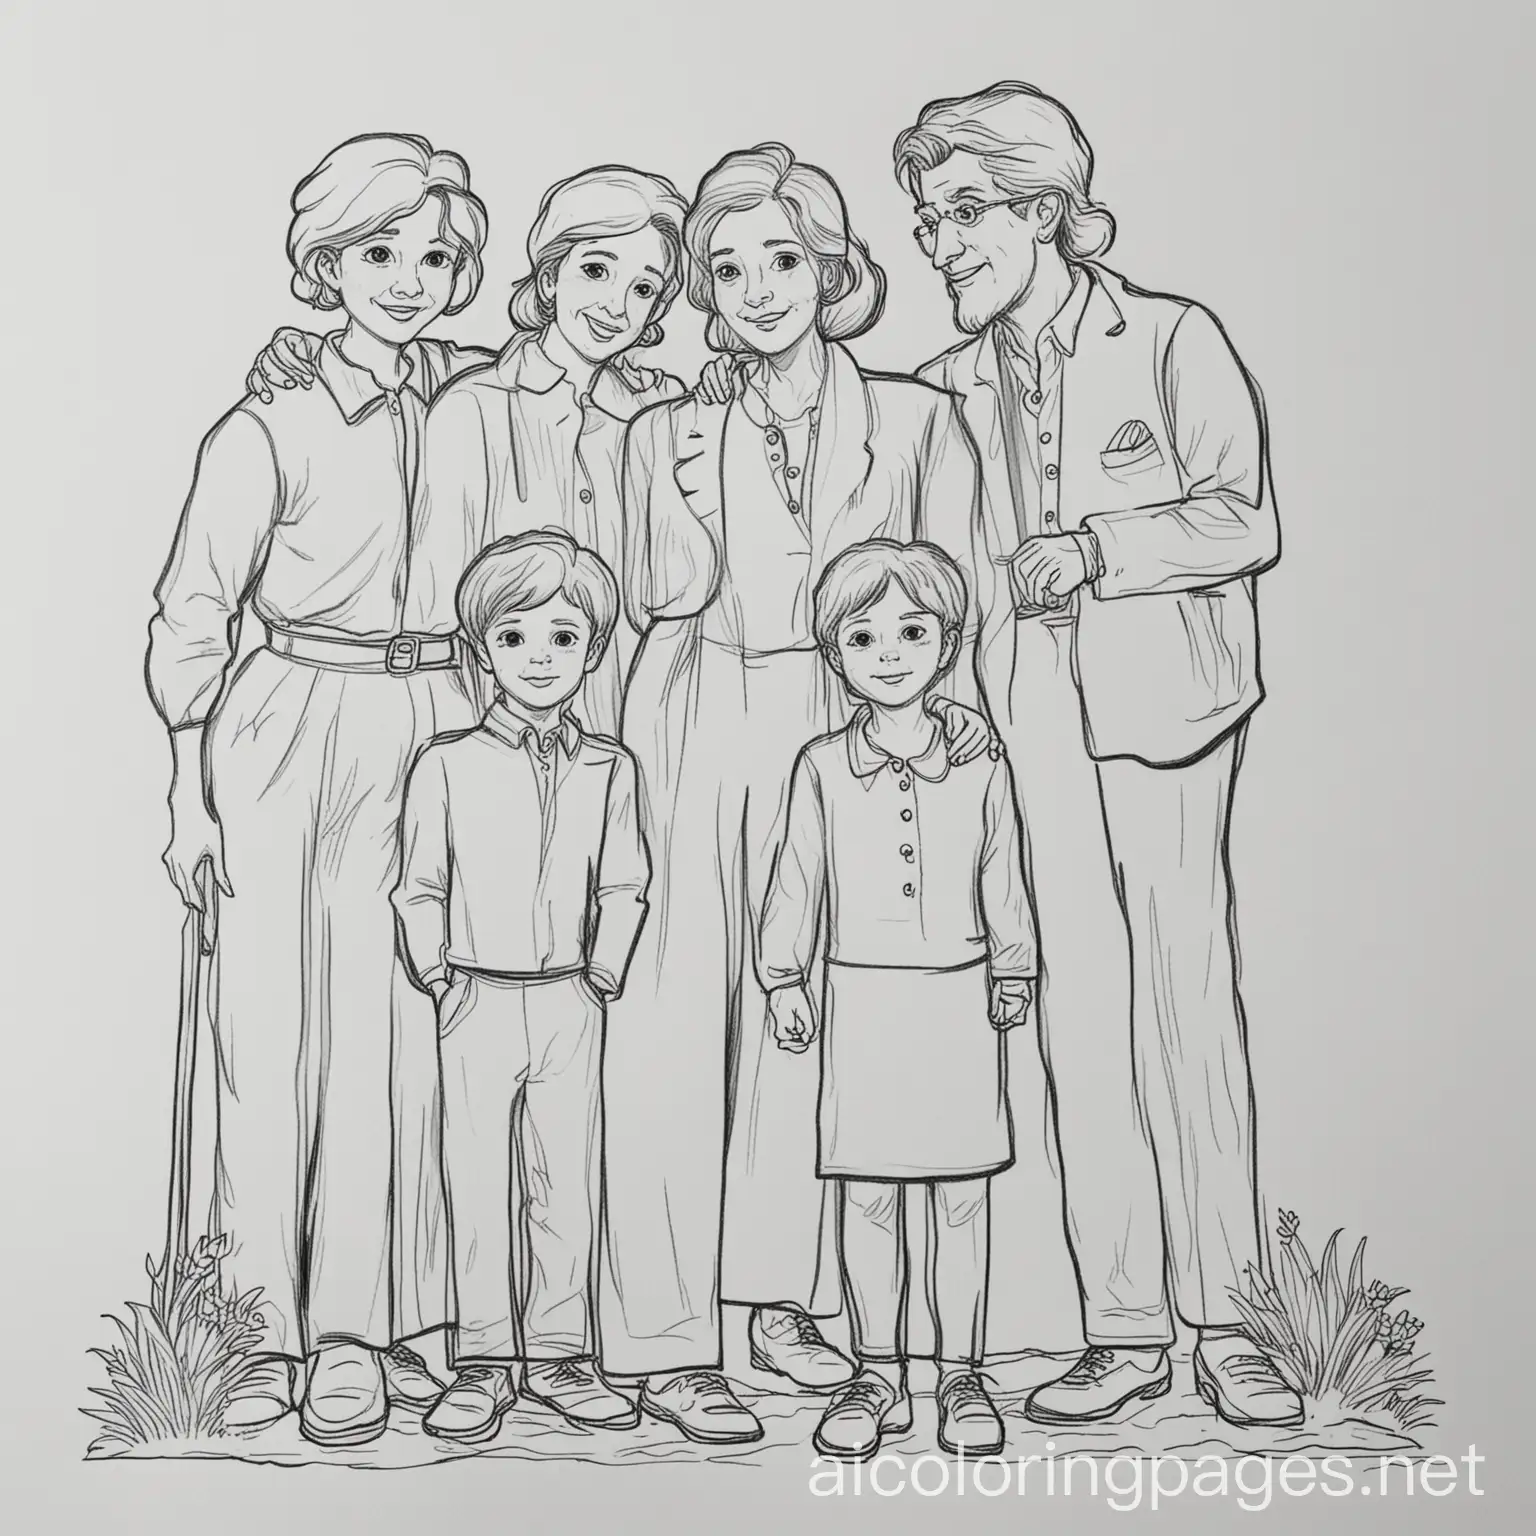 la famille en francais, la mere, le pere, le frere, la soeur, moi, Coloring Page, black and white, line art, white background, Simplicity, Ample White Space. The background of the coloring page is plain white to make it easy for young children to color within the lines. The outlines of all the subjects are easy to distinguish, making it simple for kids to color without too much difficulty